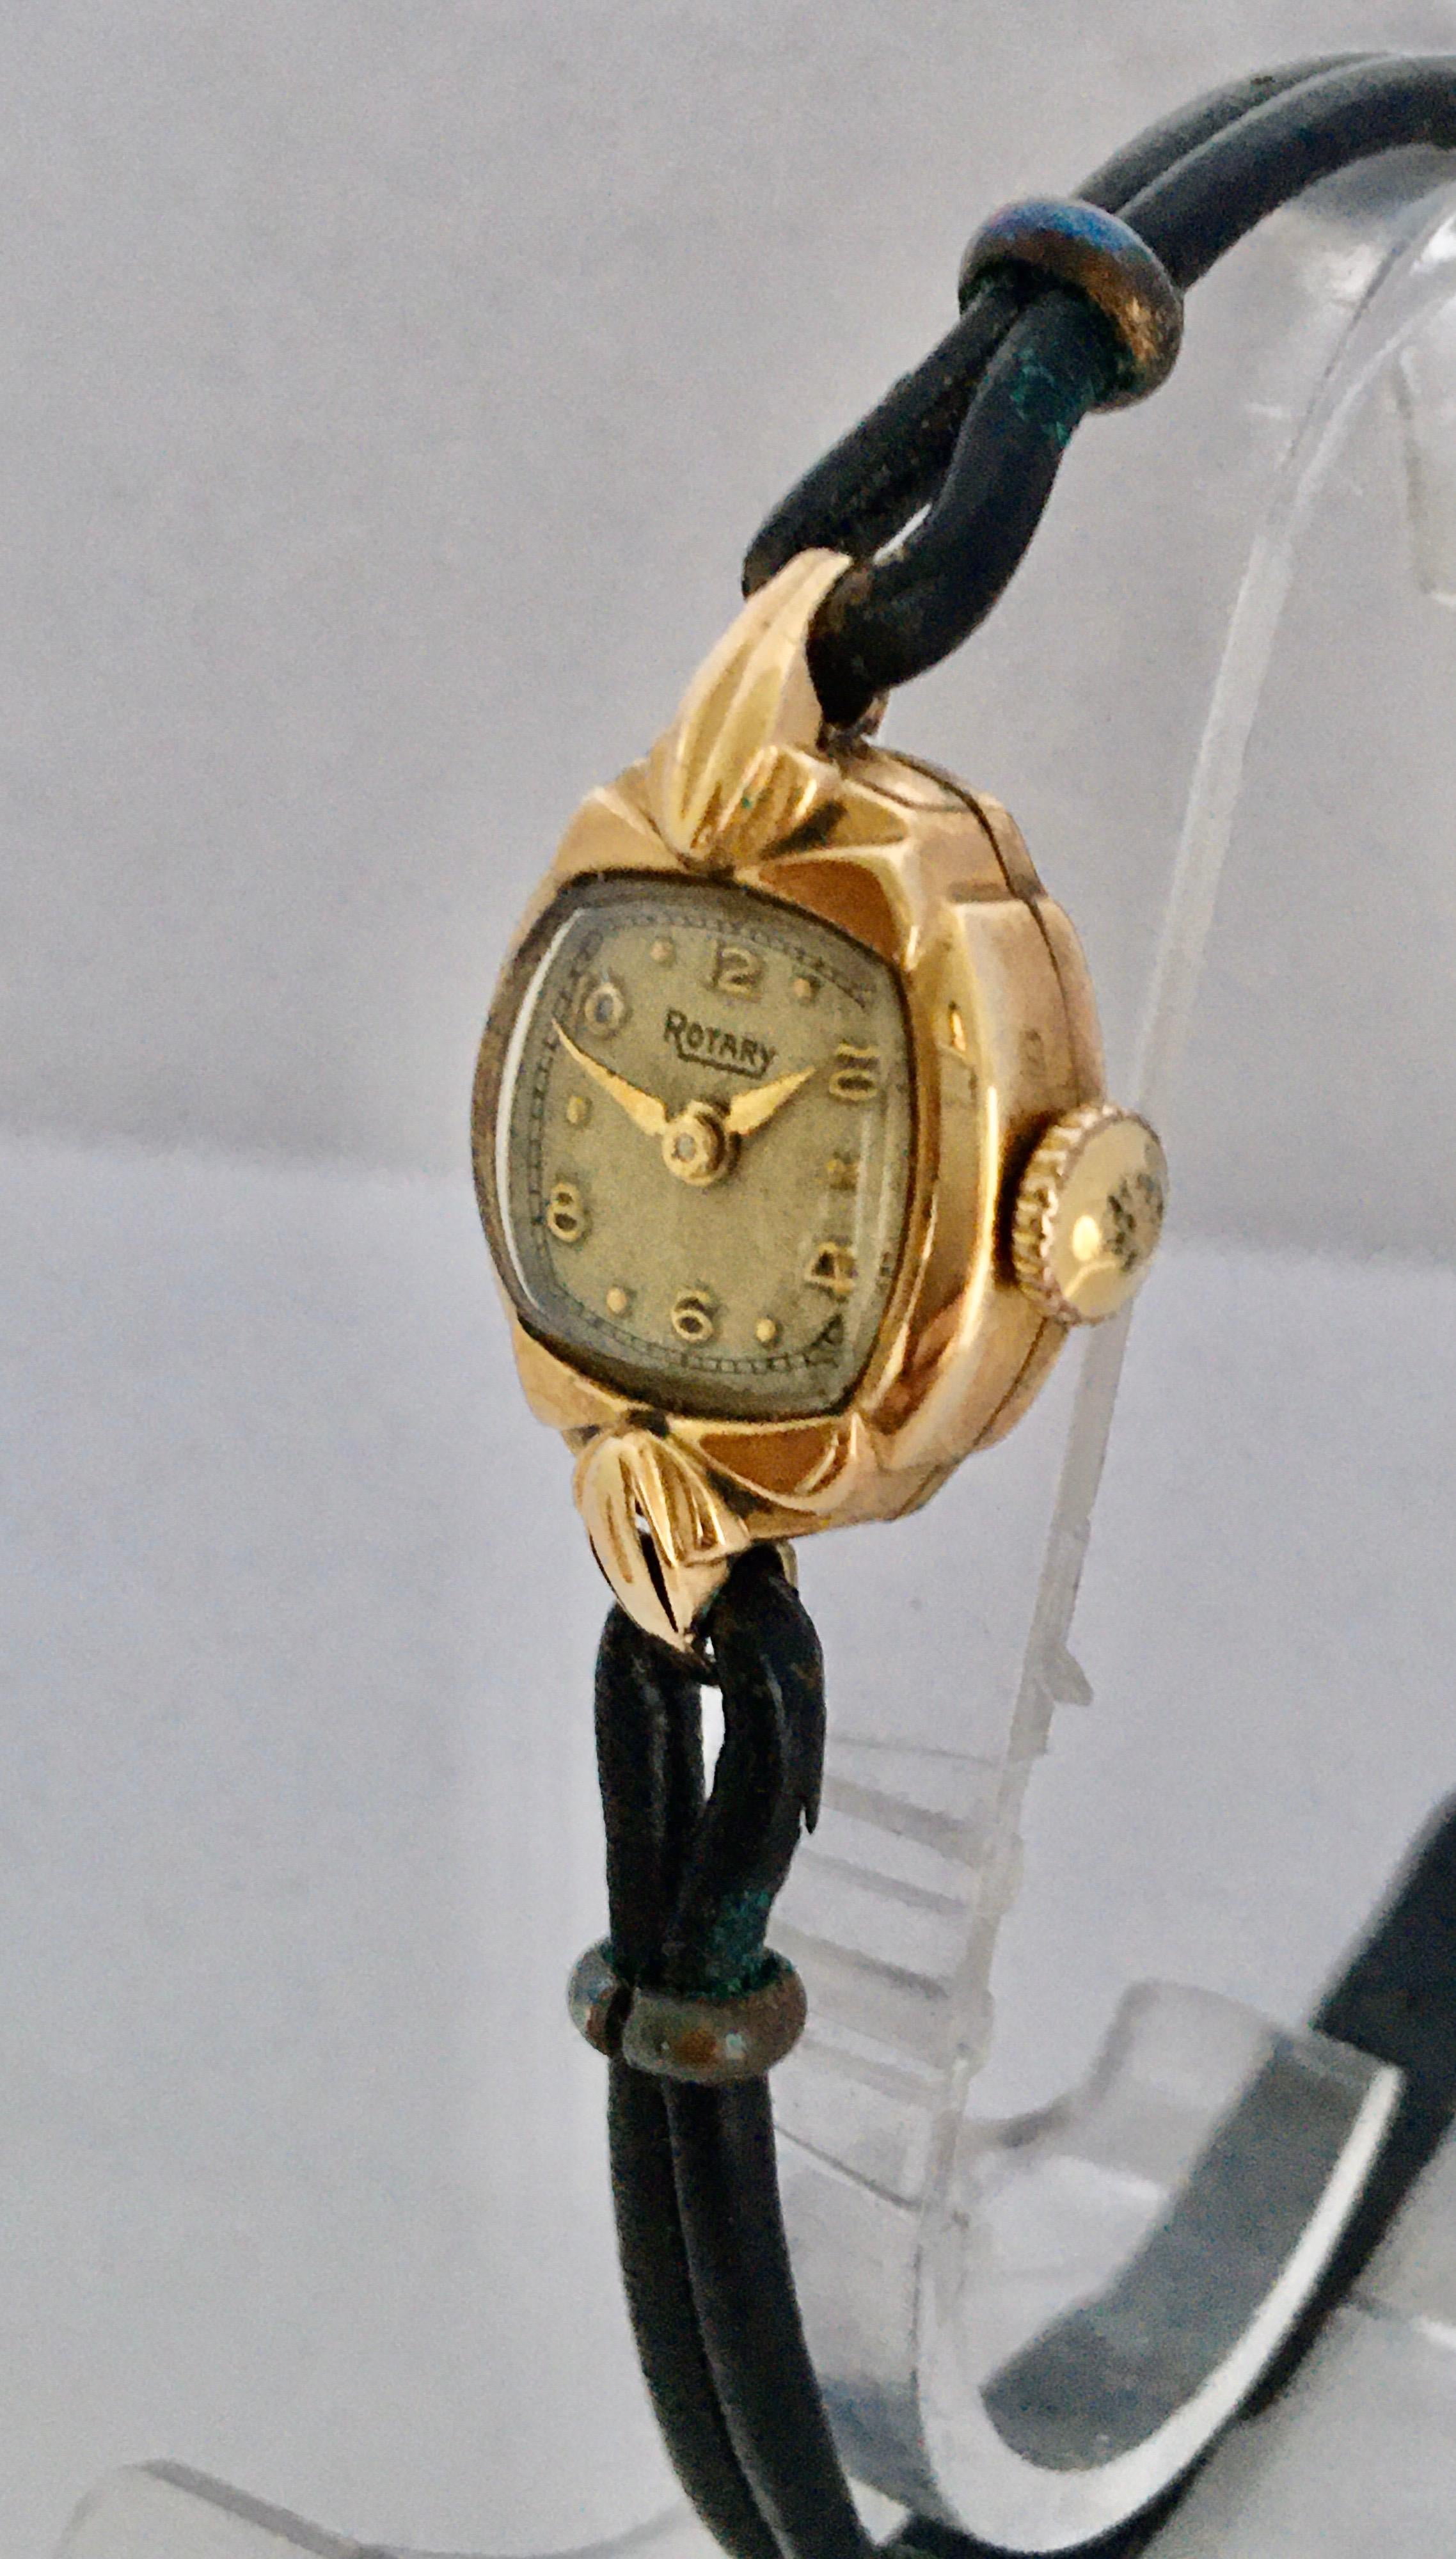 This beautiful vintage mechanical gold watch is in good working condition and it is ticking well.

Please study the images carefully as form part of the description.